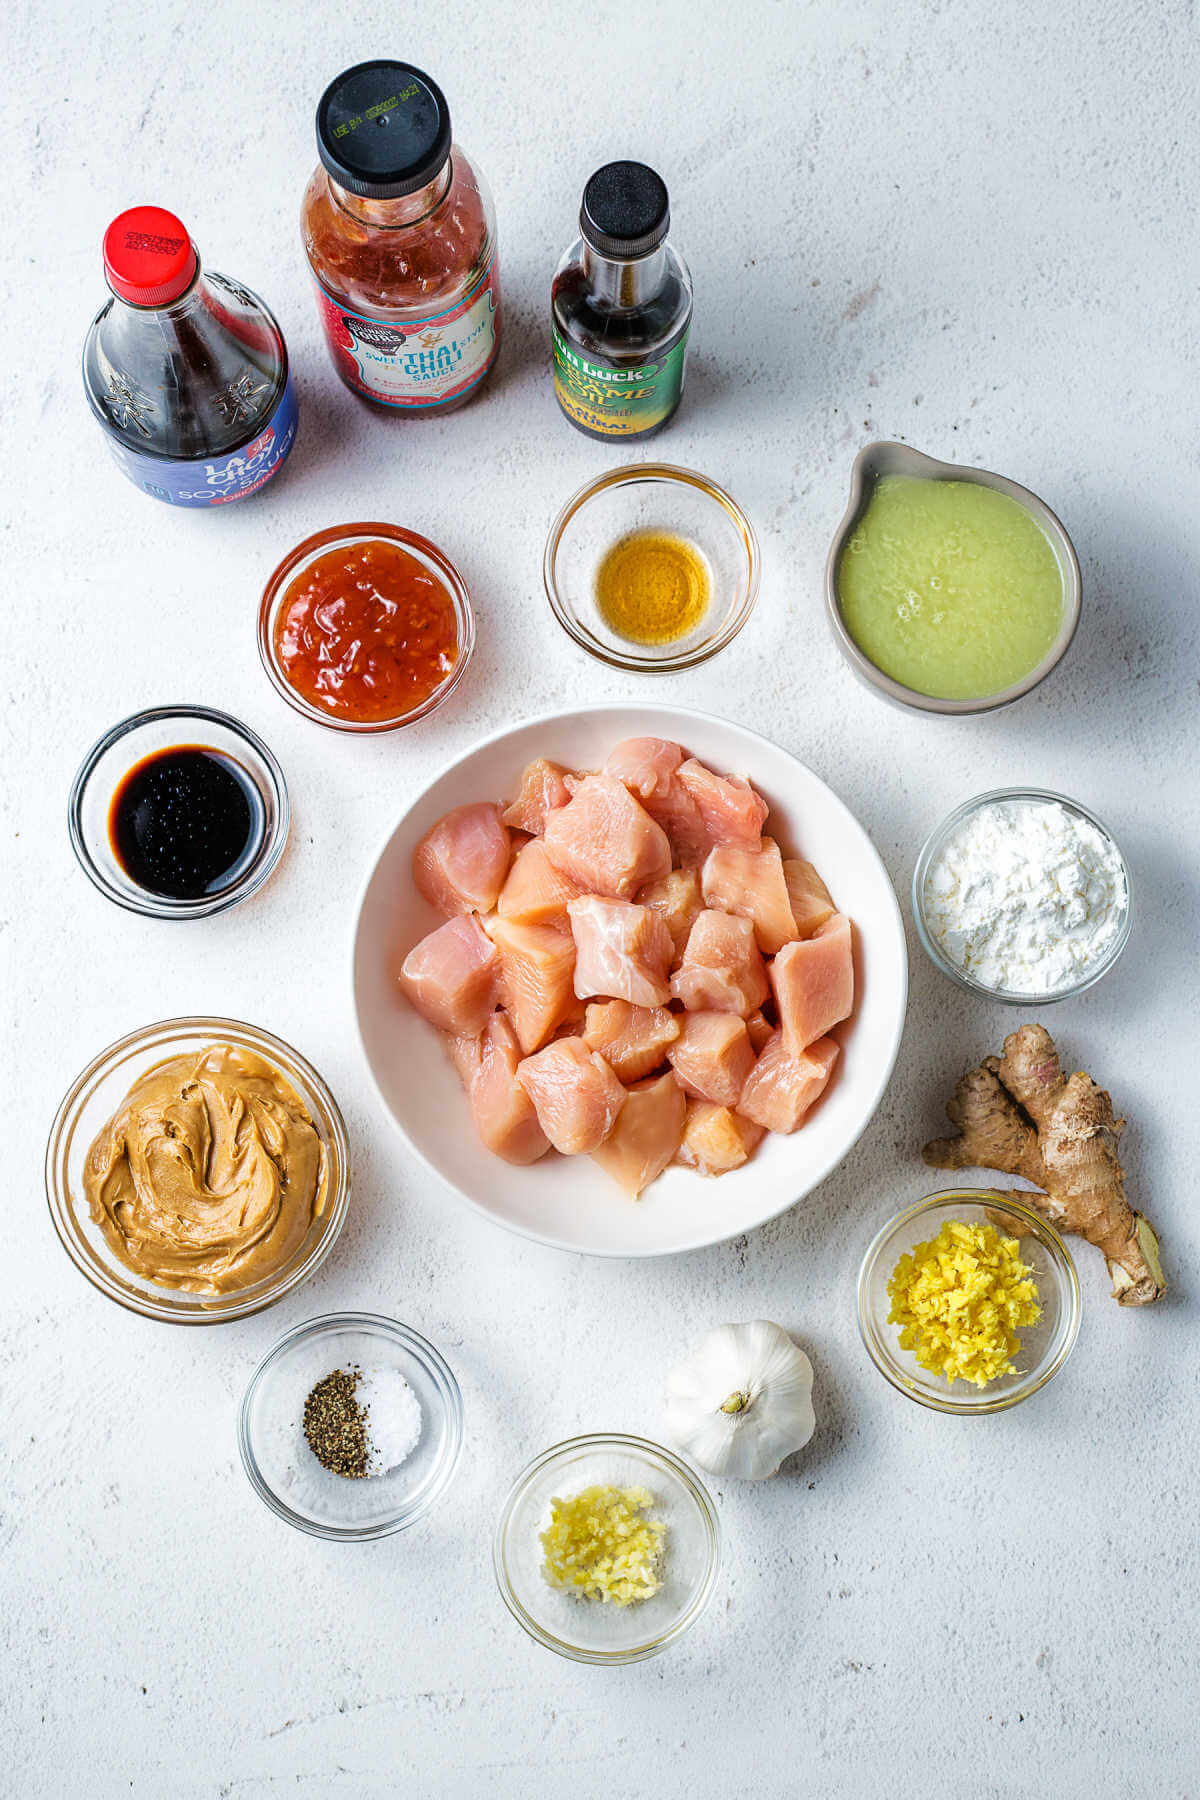 ingredients for peanut butter chicken on a table.